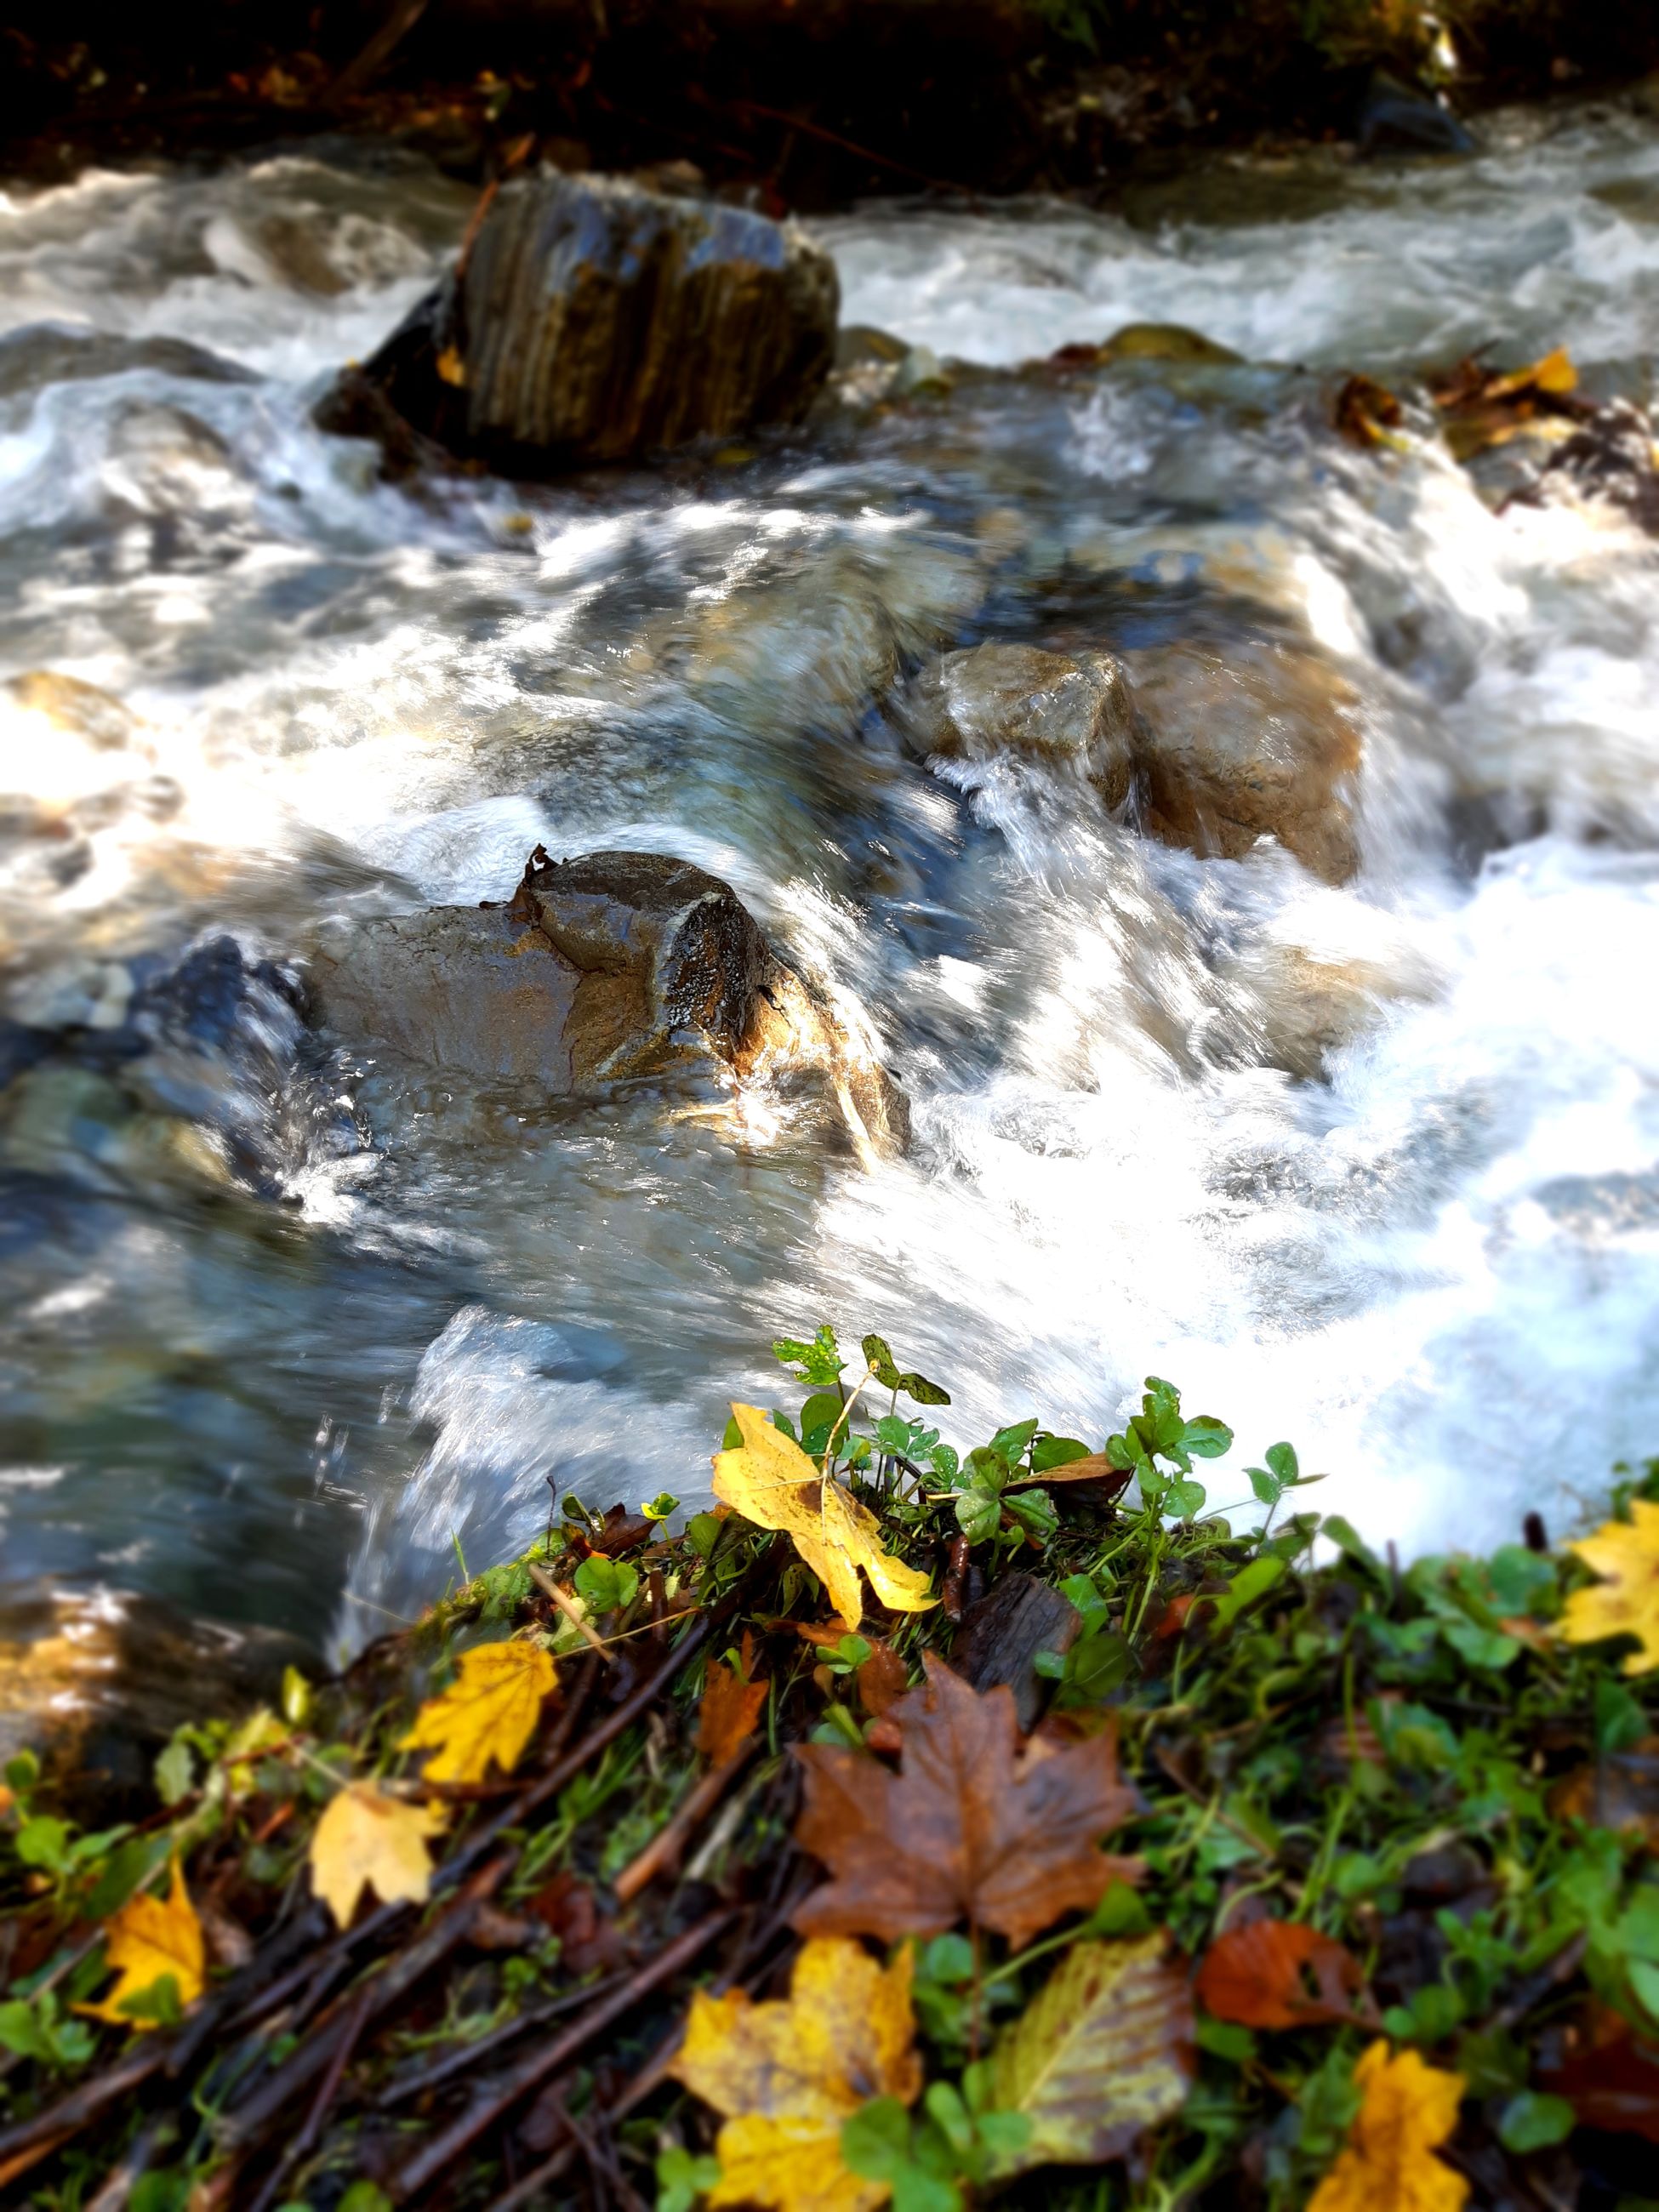 water, beauty in nature, nature, rock, flowing water, motion, plant, rock - object, solid, no people, day, land, scenics - nature, long exposure, outdoors, river, flowering plant, plant part, flower, flowing, stream - flowing water, running water